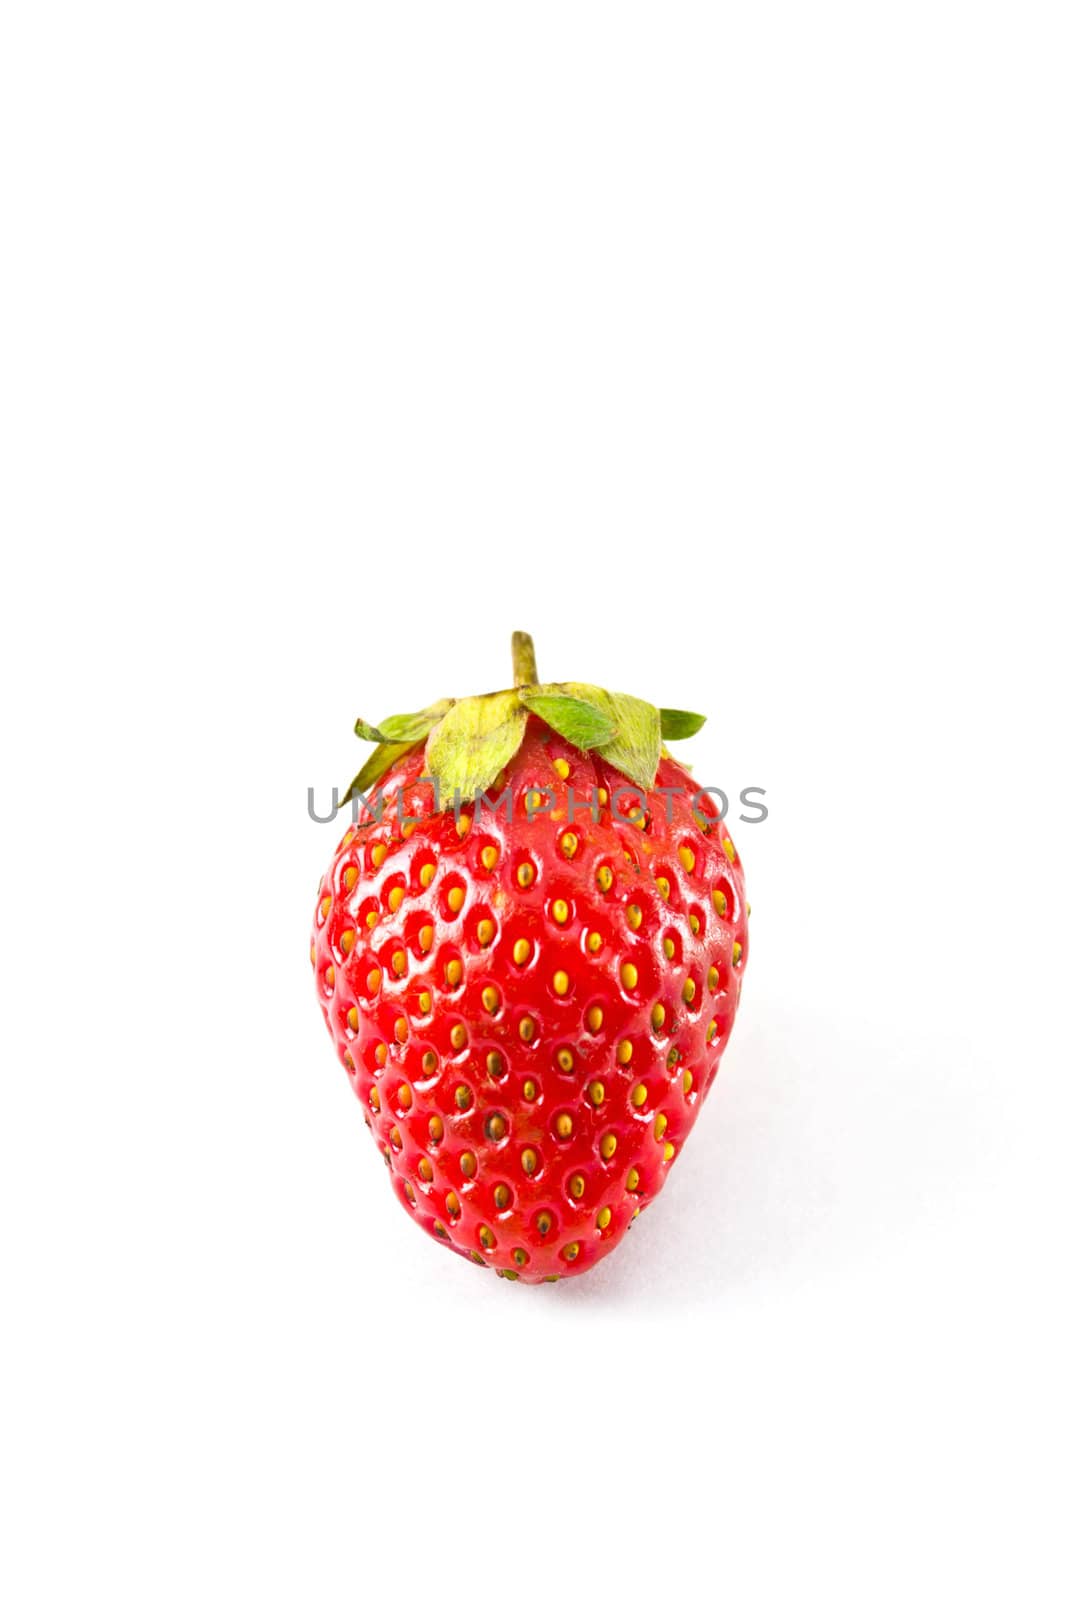 strawberries placed on a white background